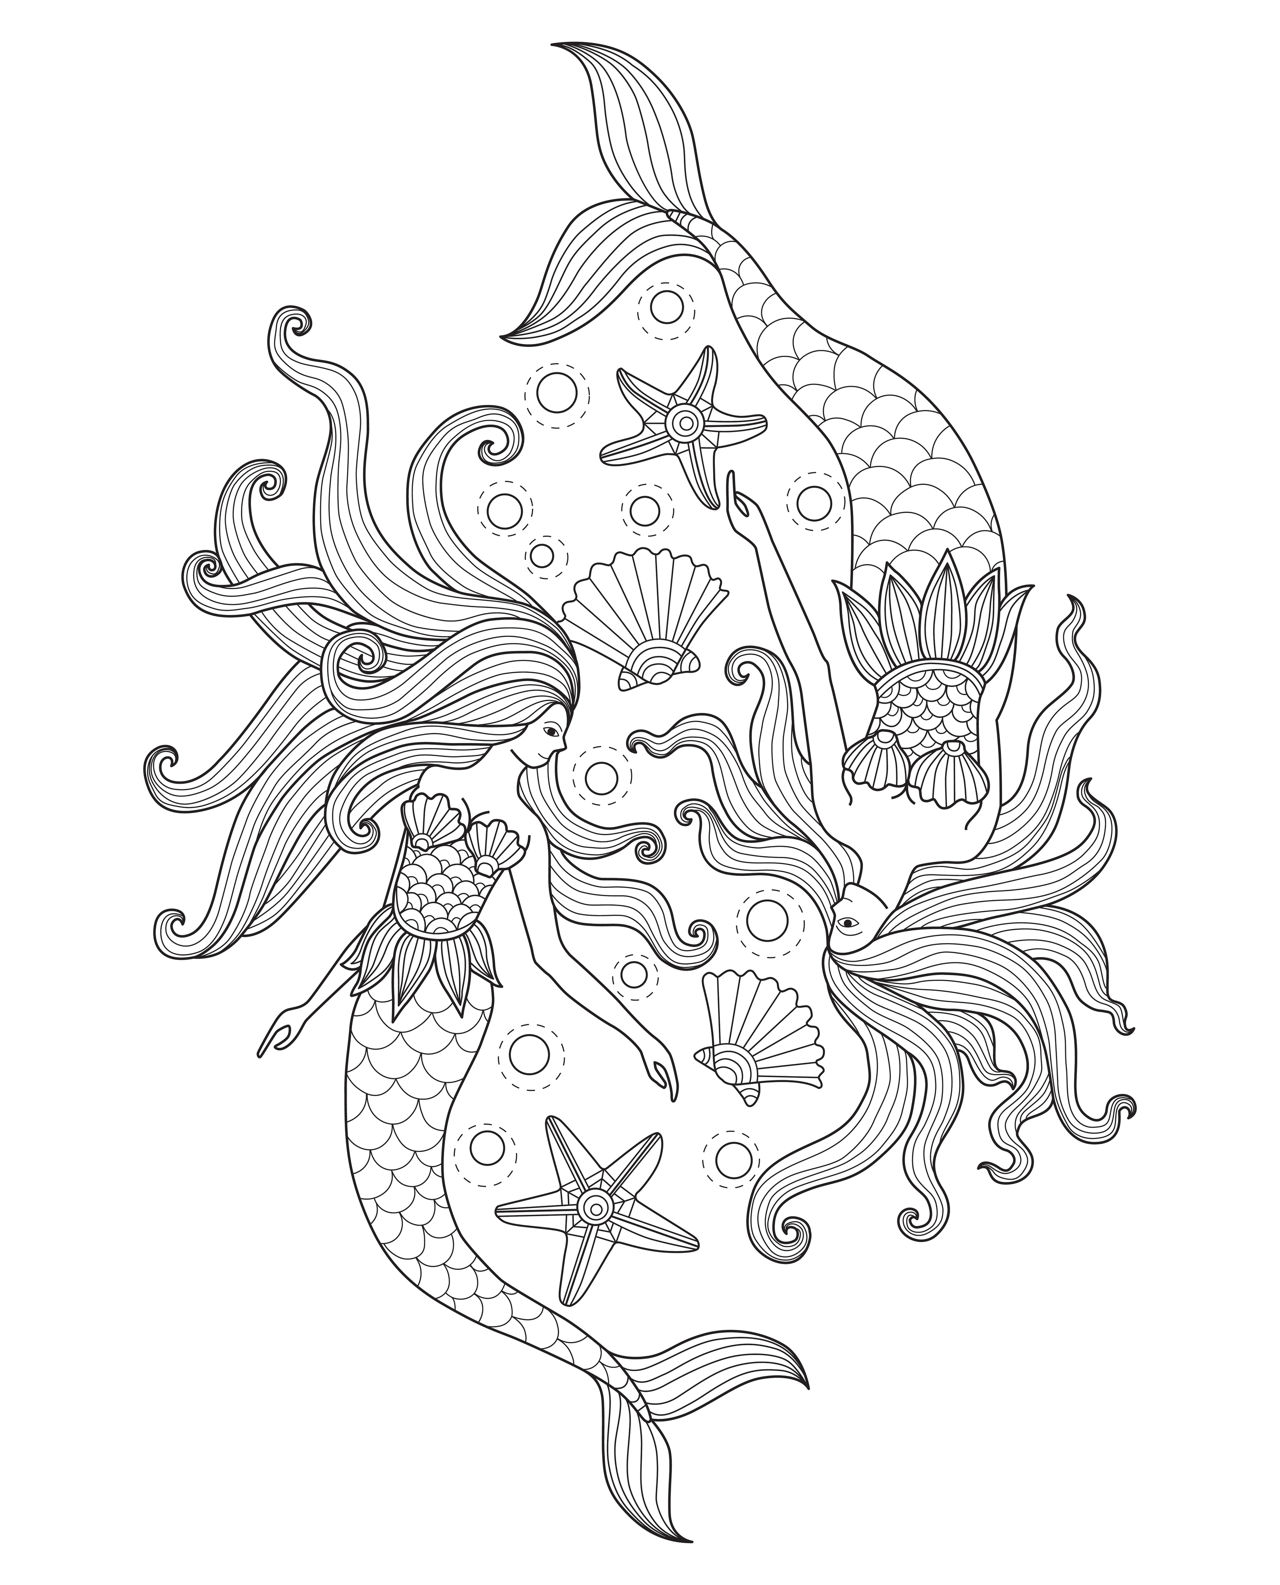 Free Printable Mermaid Coloring Pages for Kids - Art Hearty